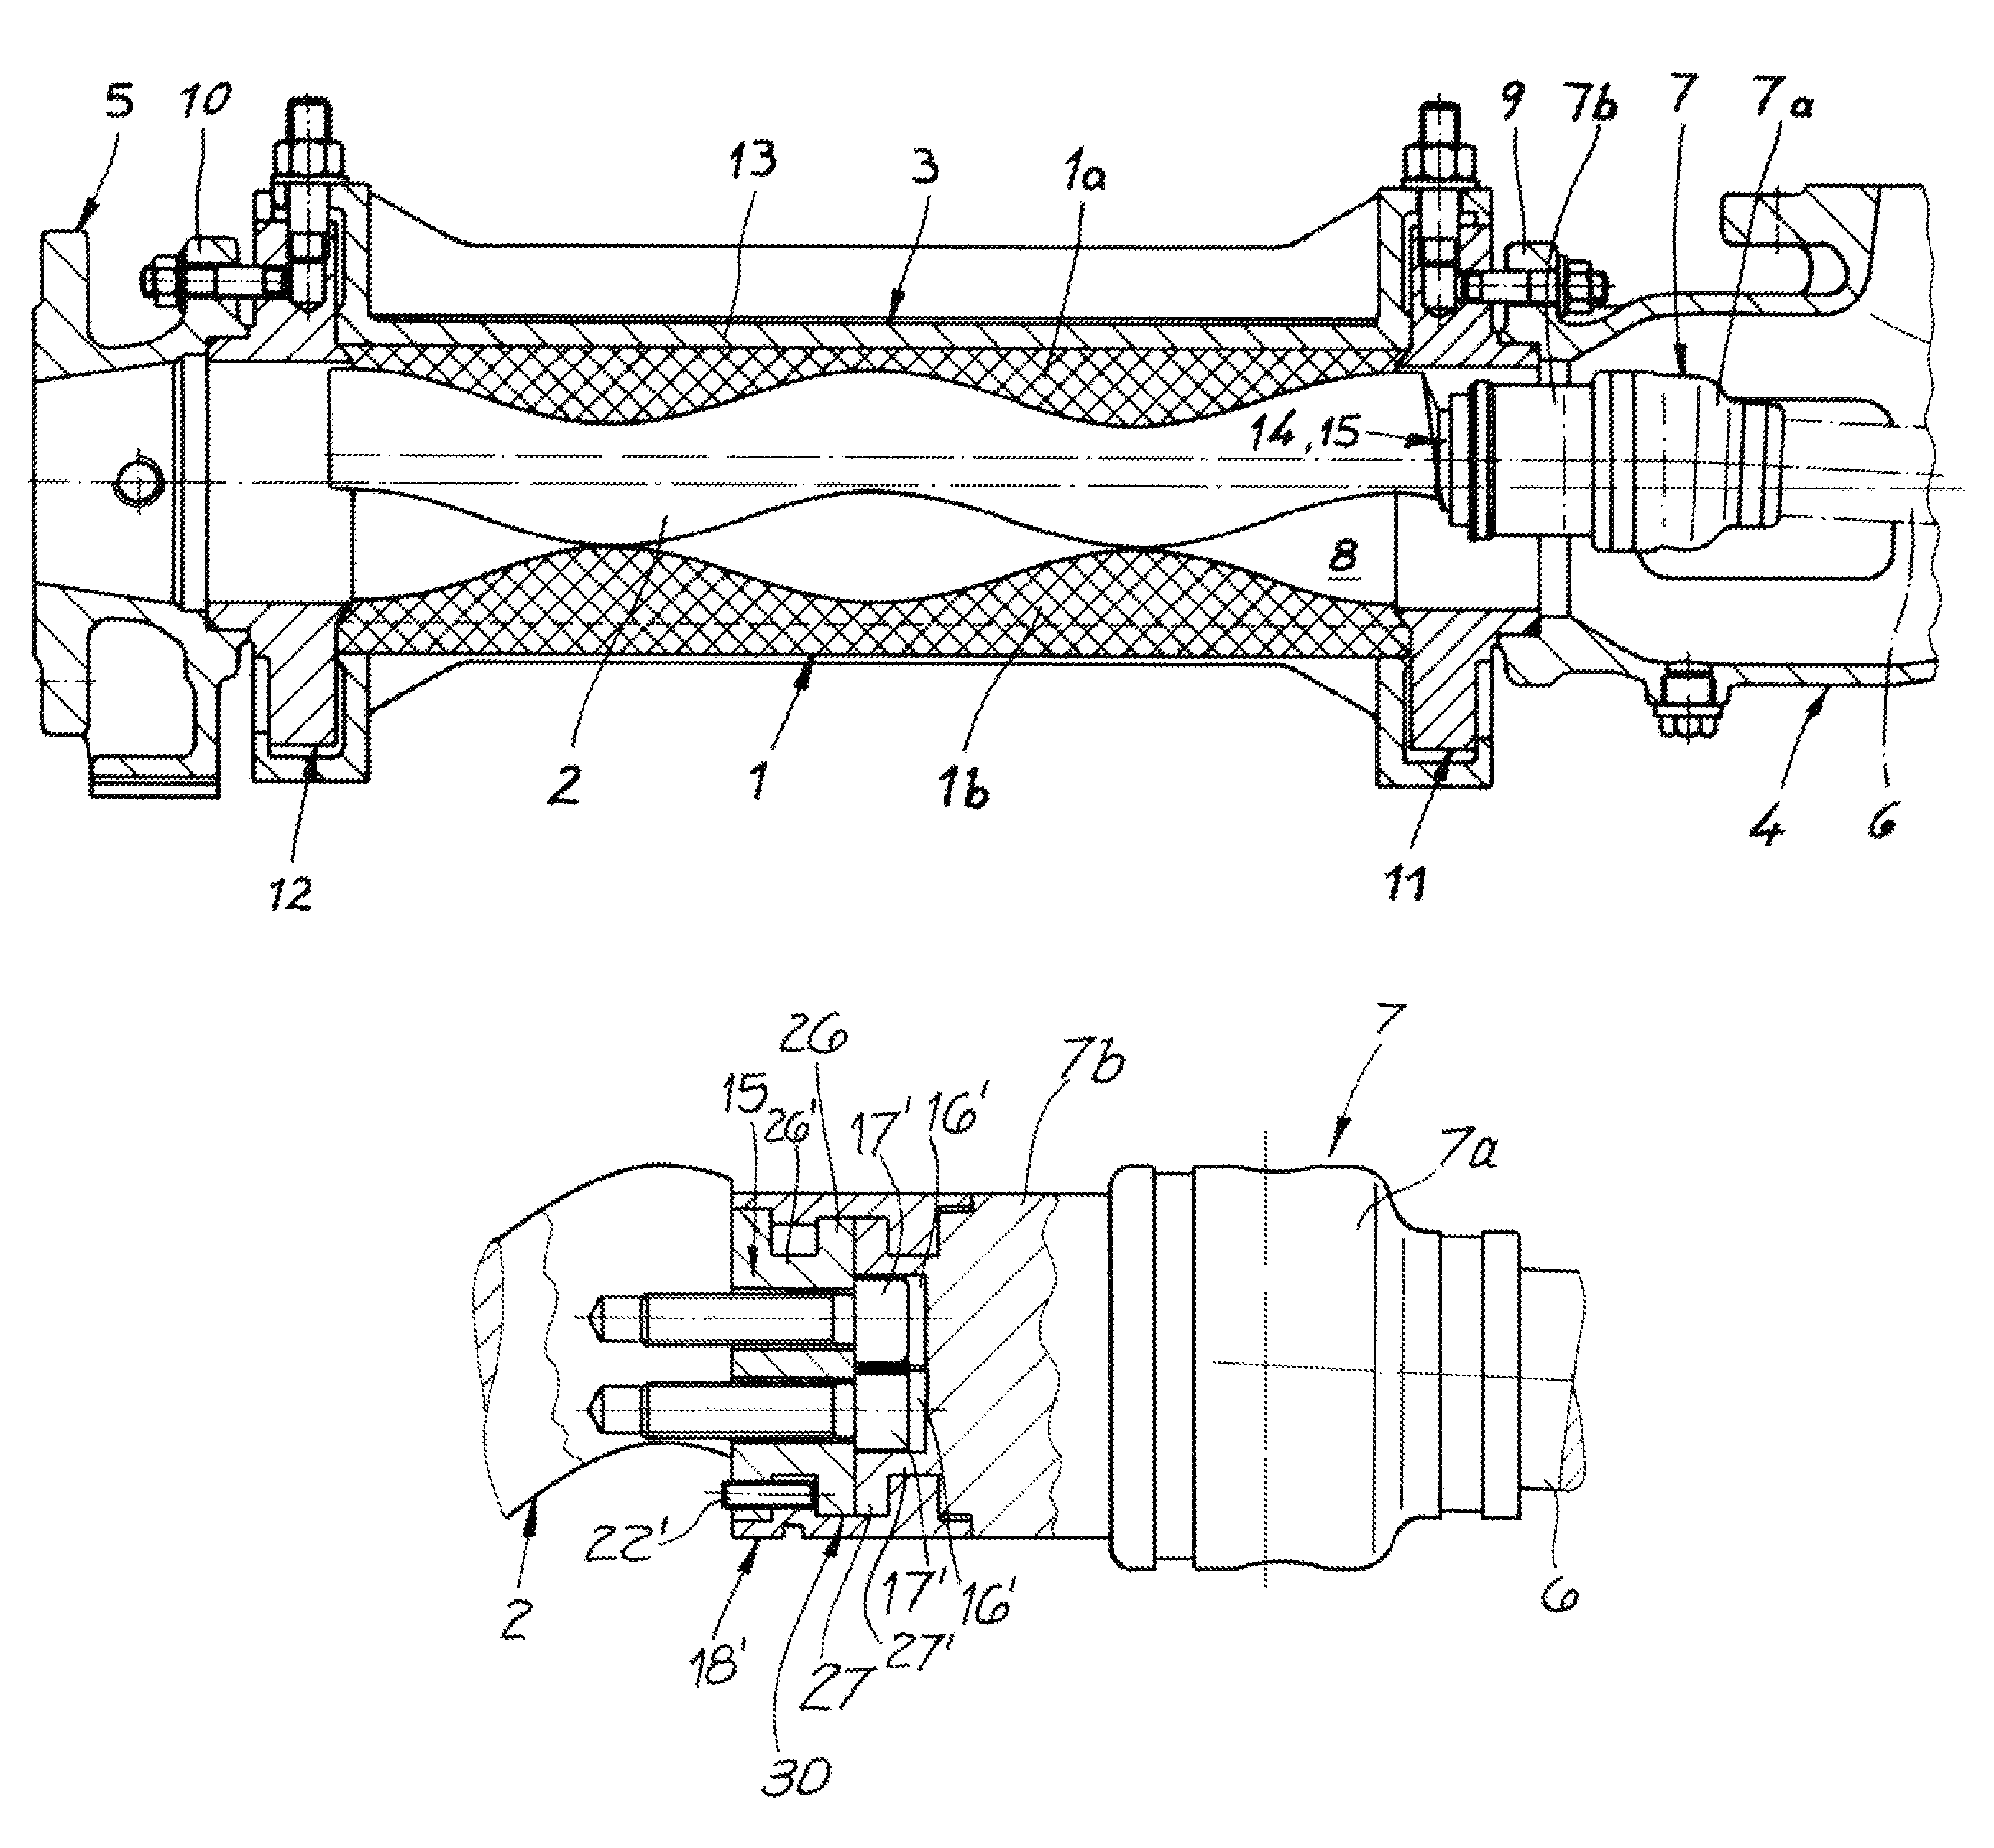 Eccentric-screw pump with replaceable rotor and stator